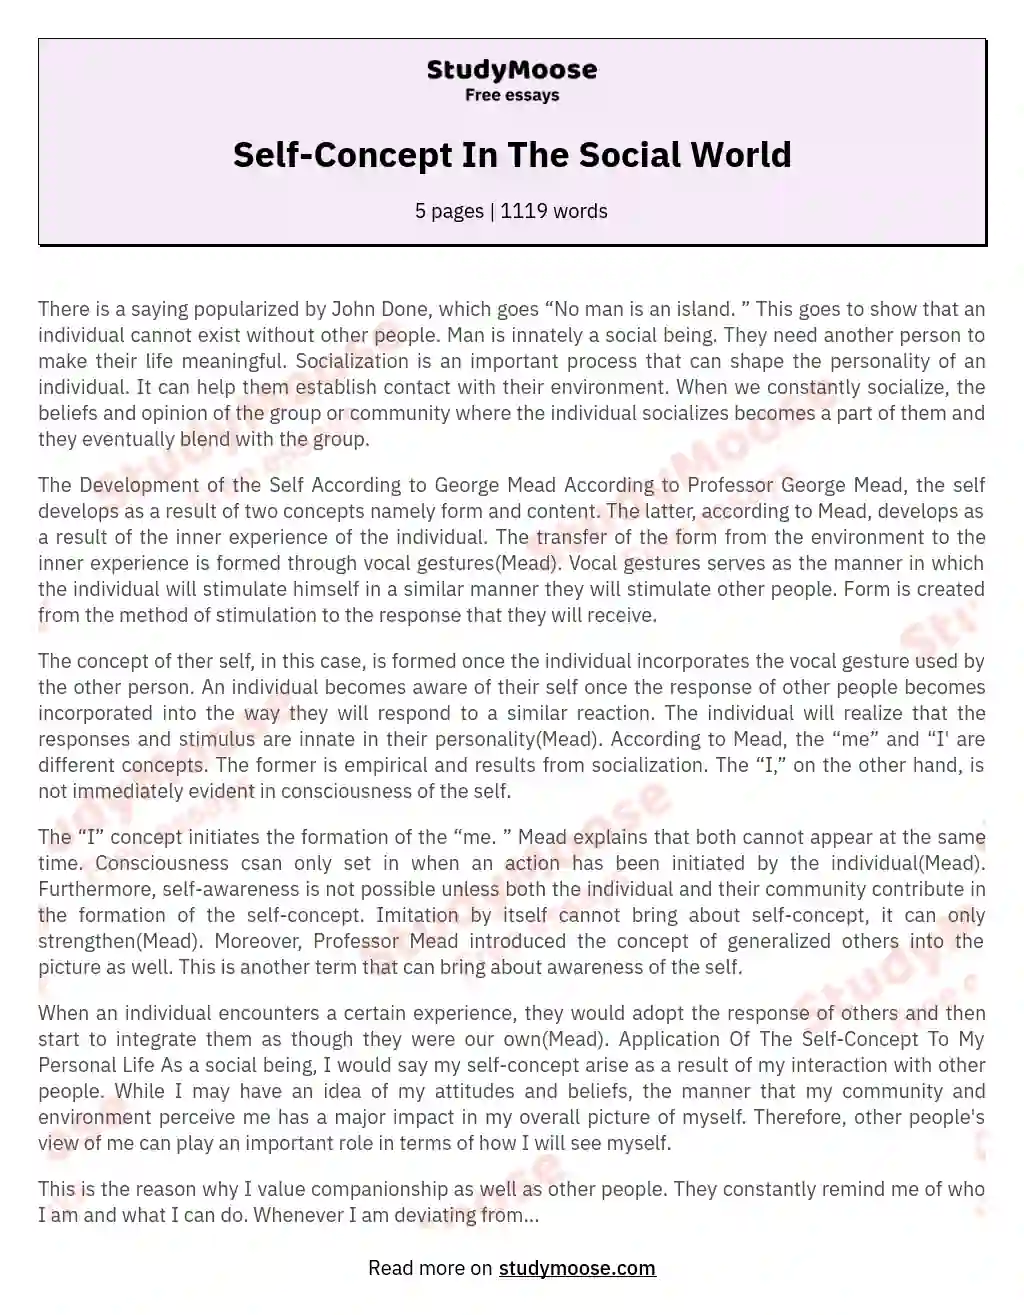 Self-Concept In The Social World essay